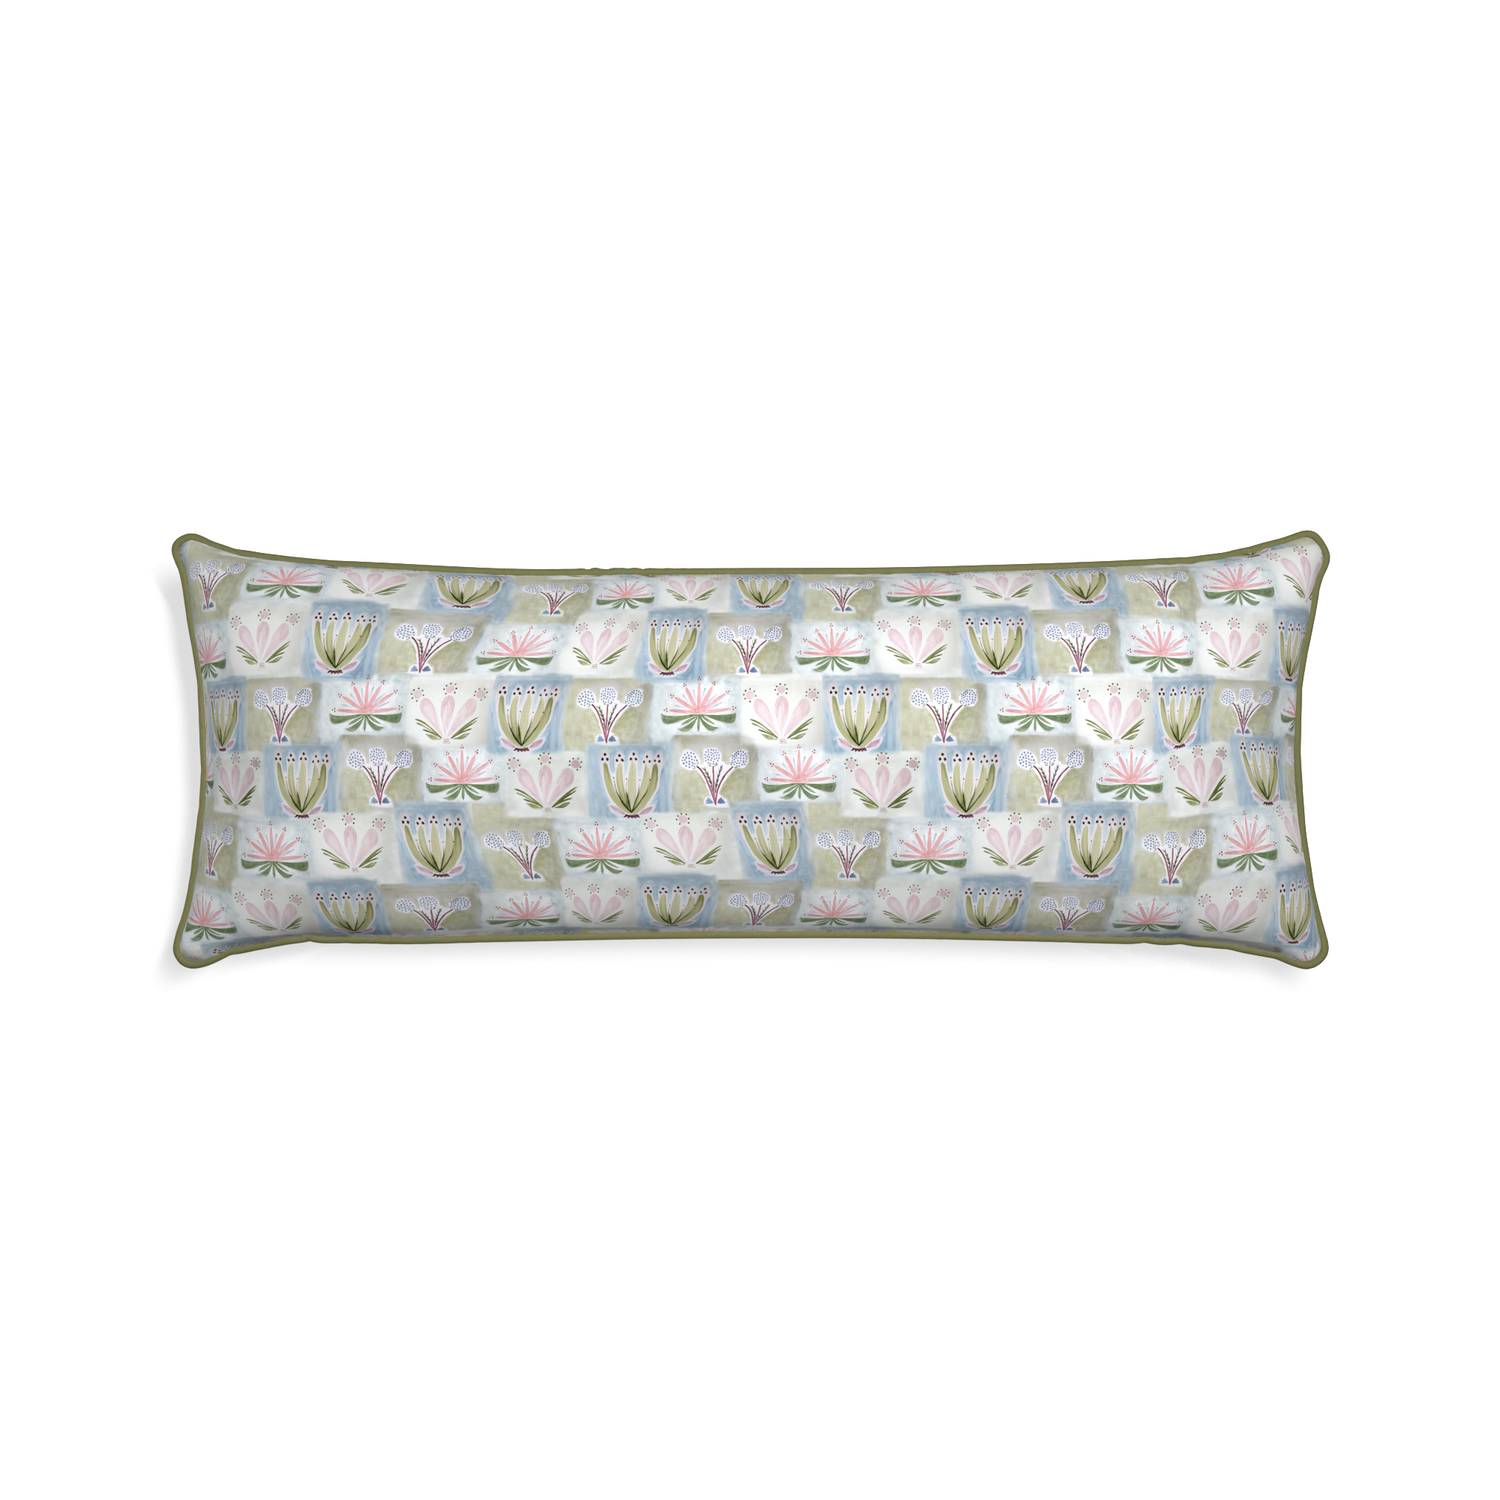 Xl-lumbar harper custom pillow with moss piping on white background